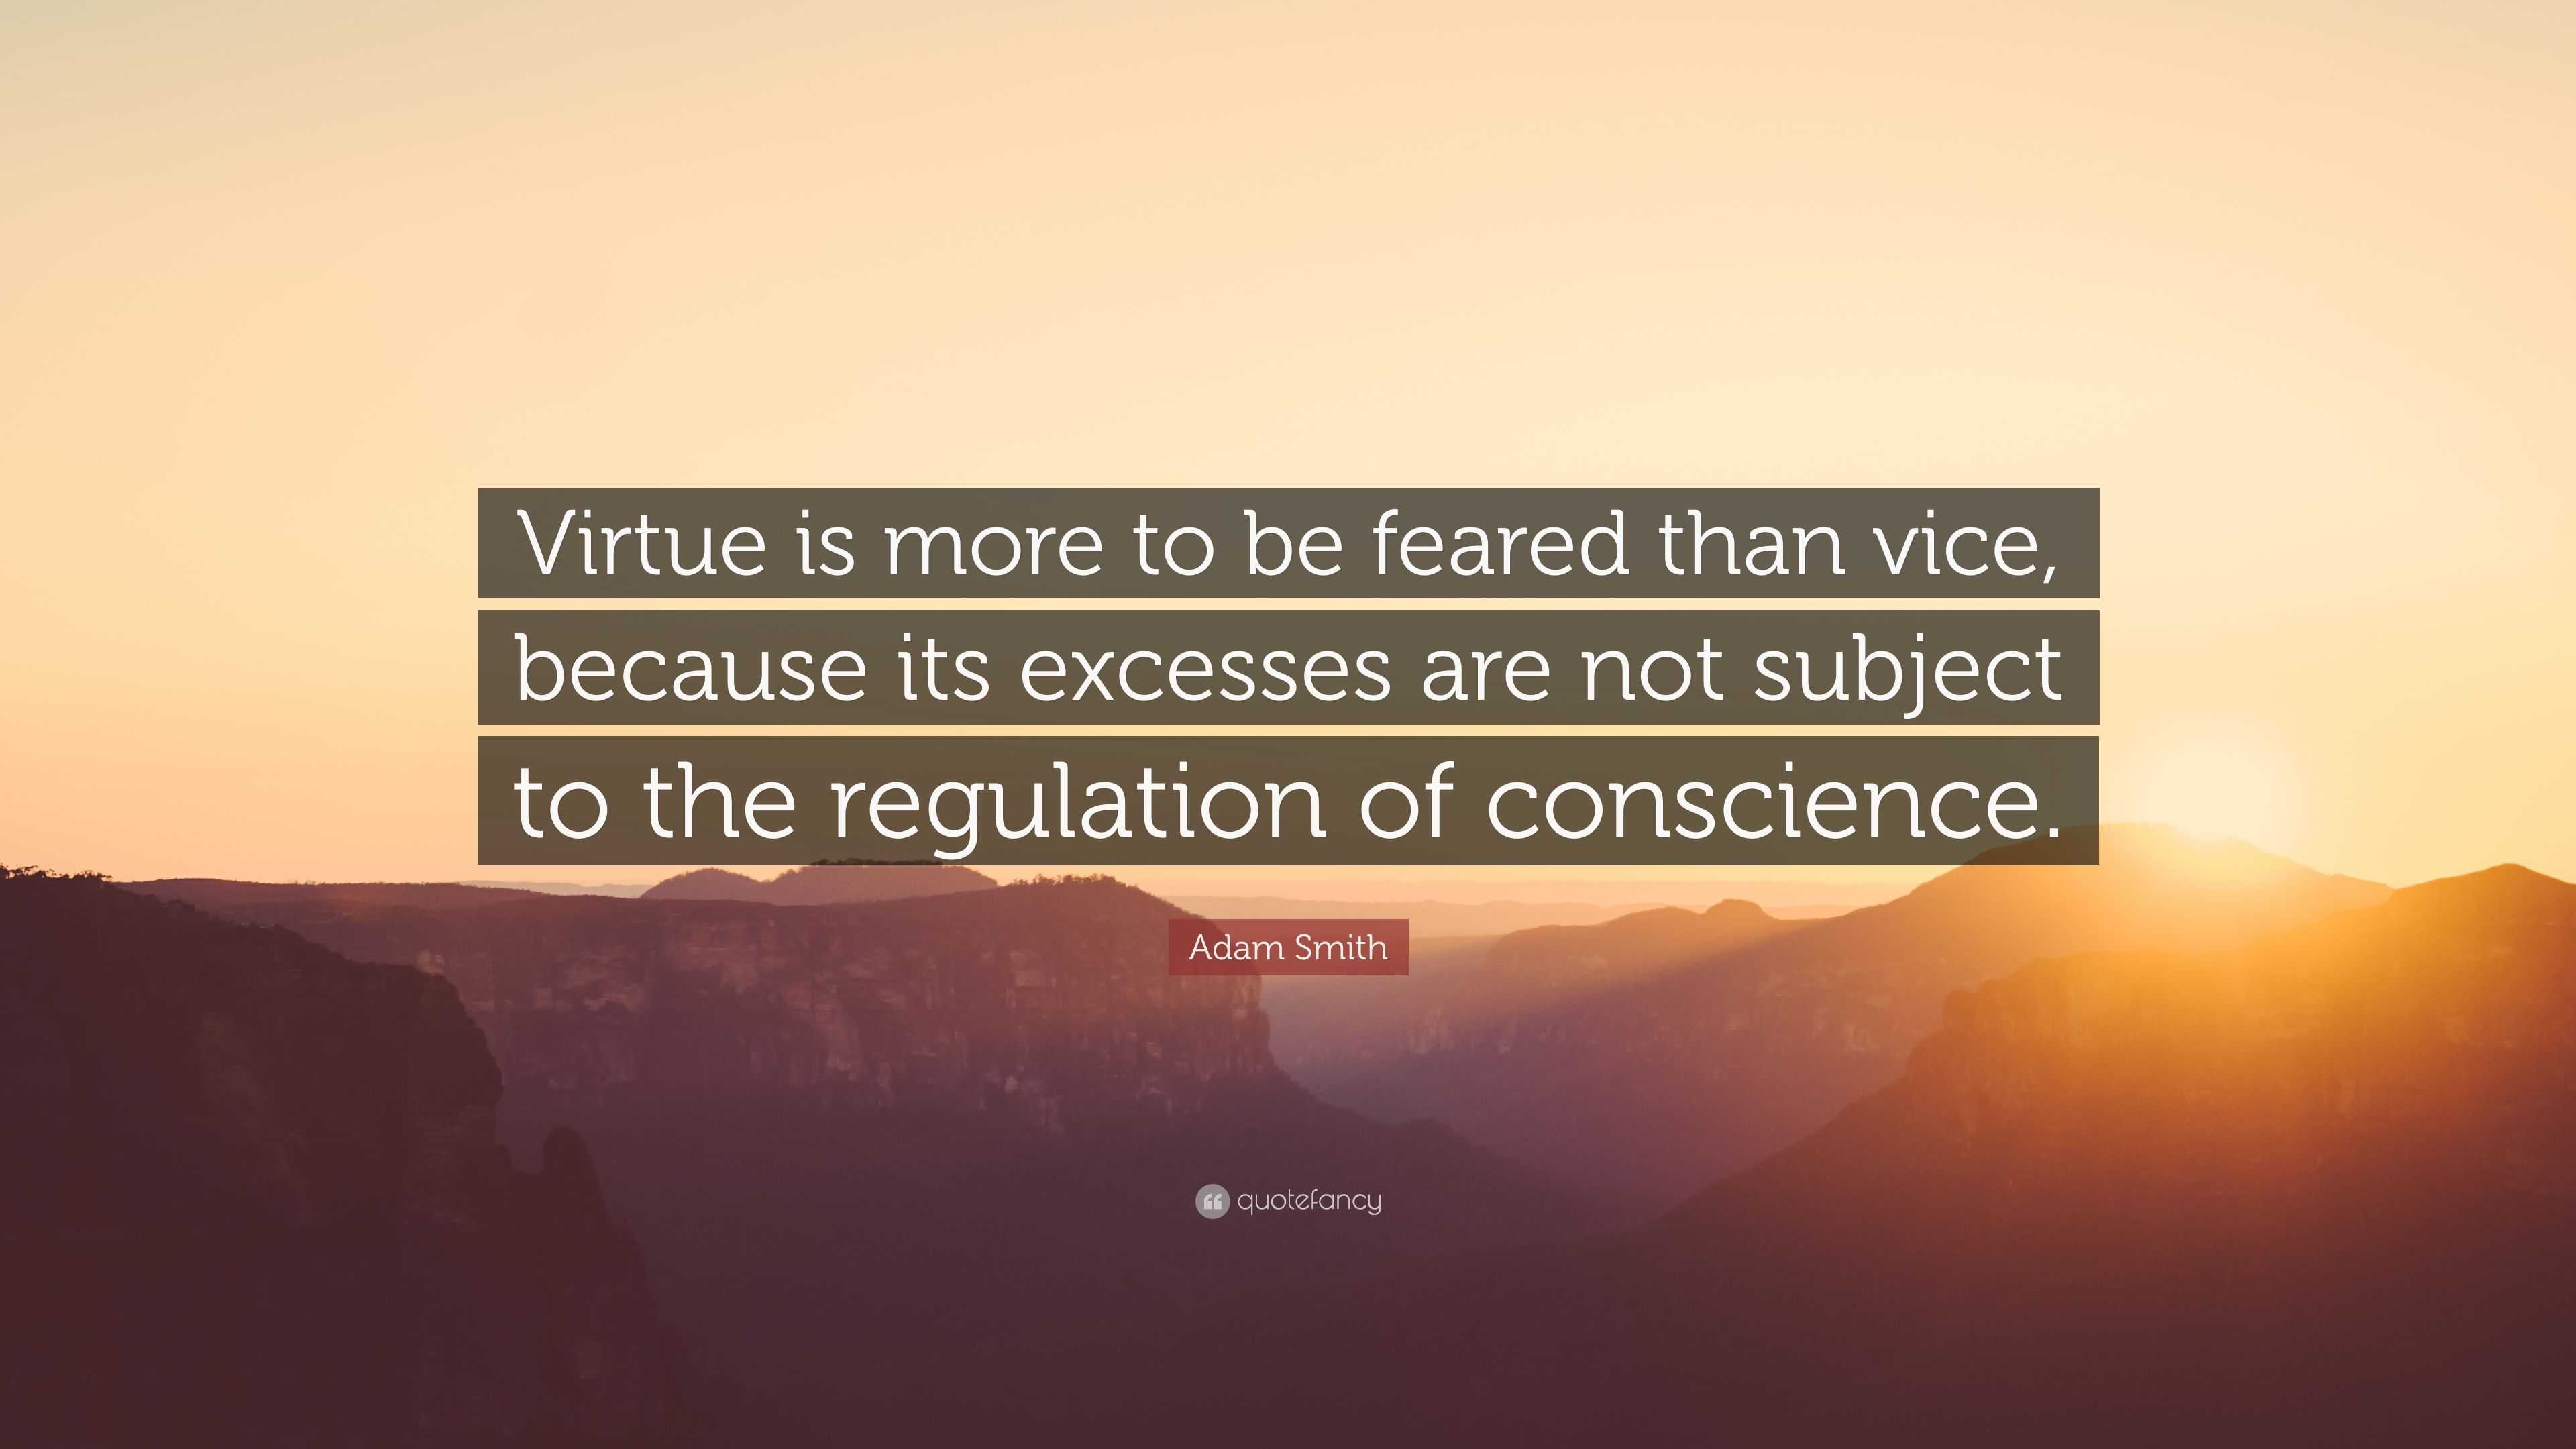 3919054-Adam-Smith-Quote-Virtue-is-more-to-be-feared-than-vice-because-its.jpg